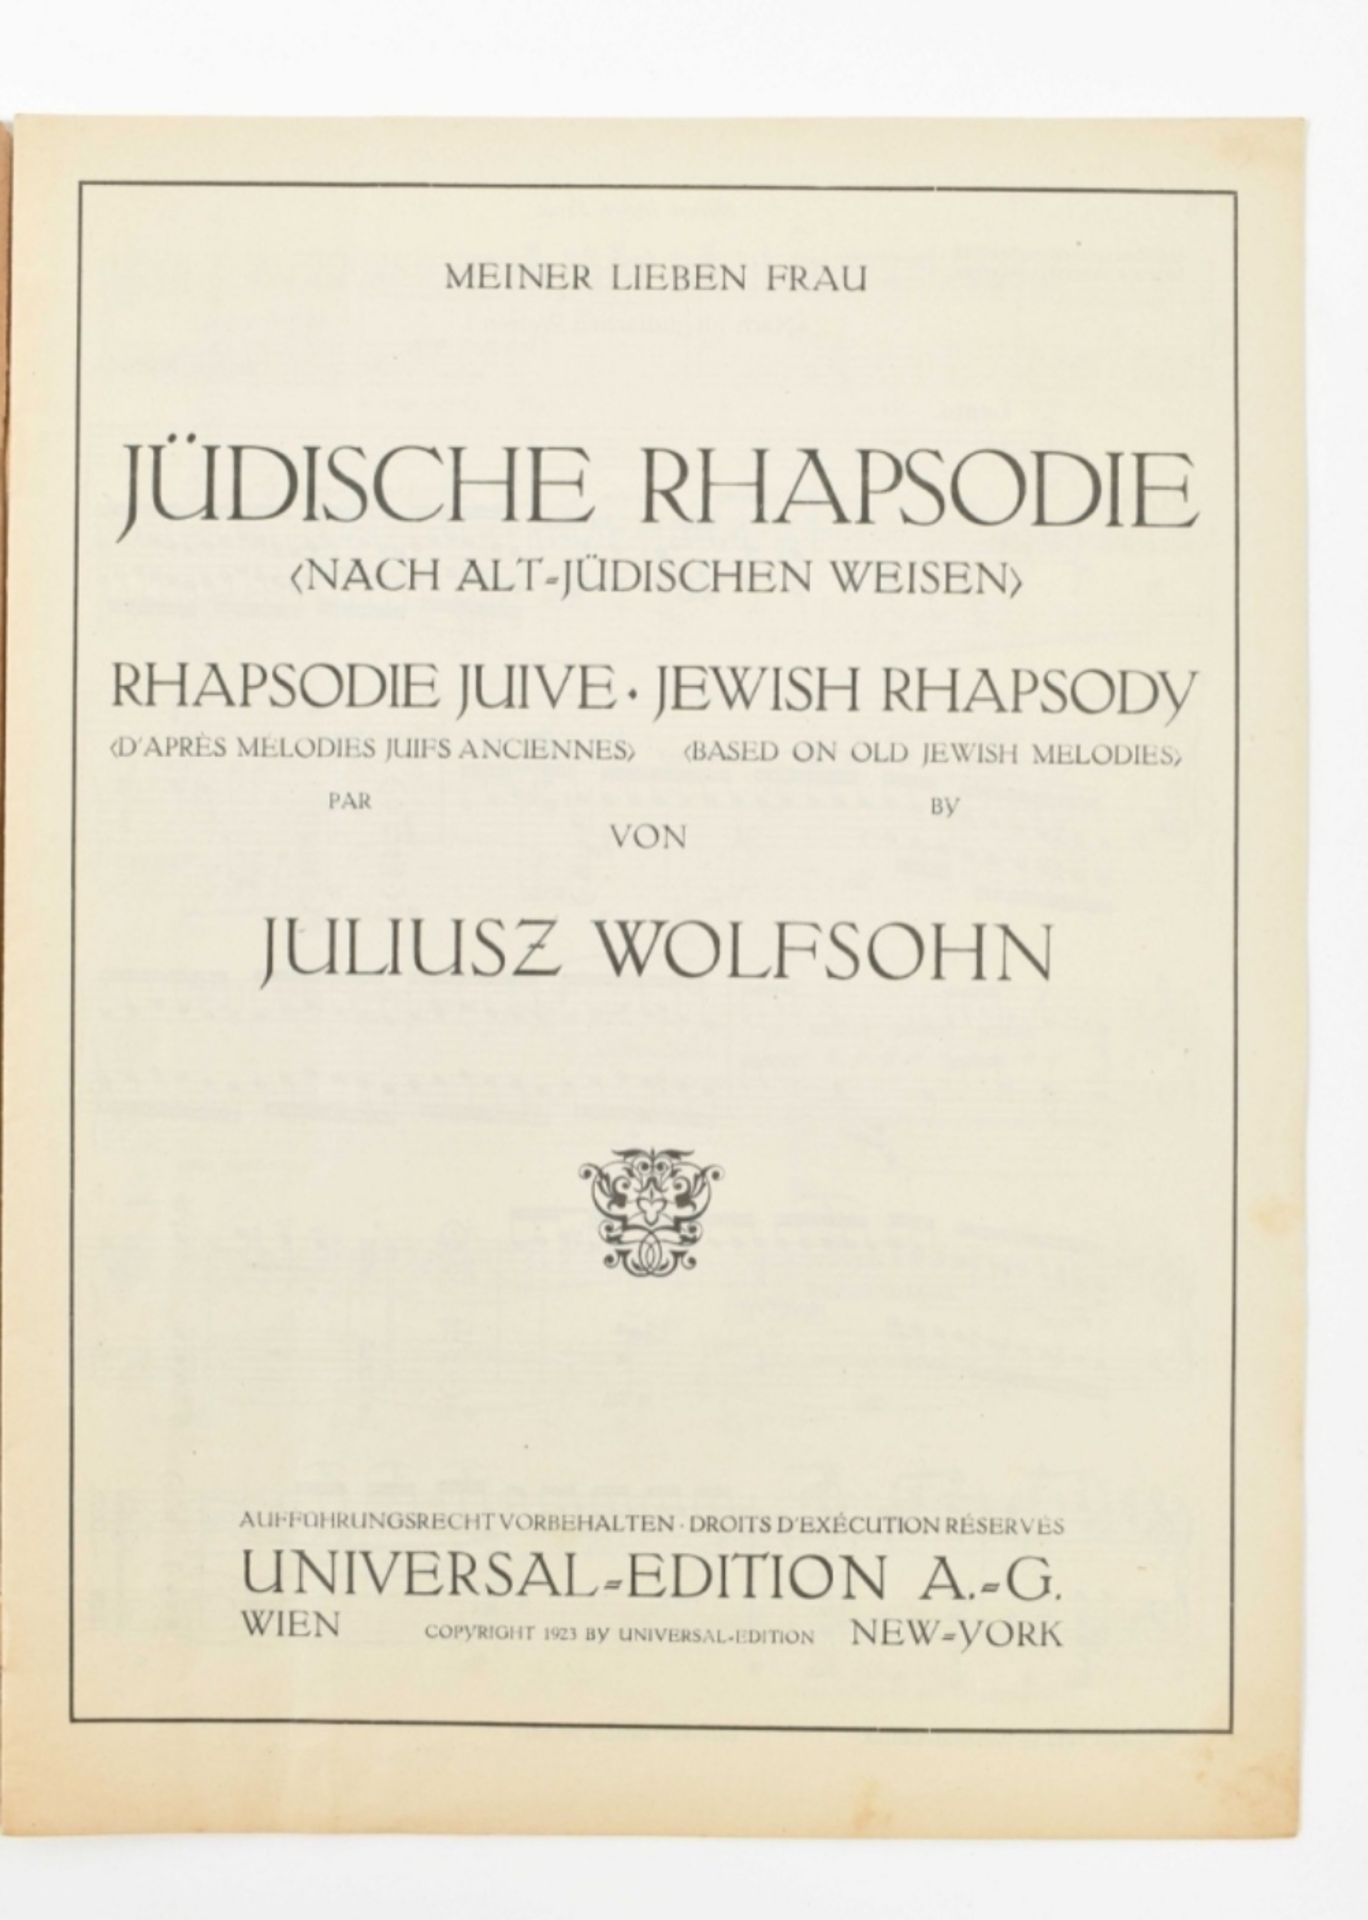 Collection of Jewish sheet music - Image 8 of 8